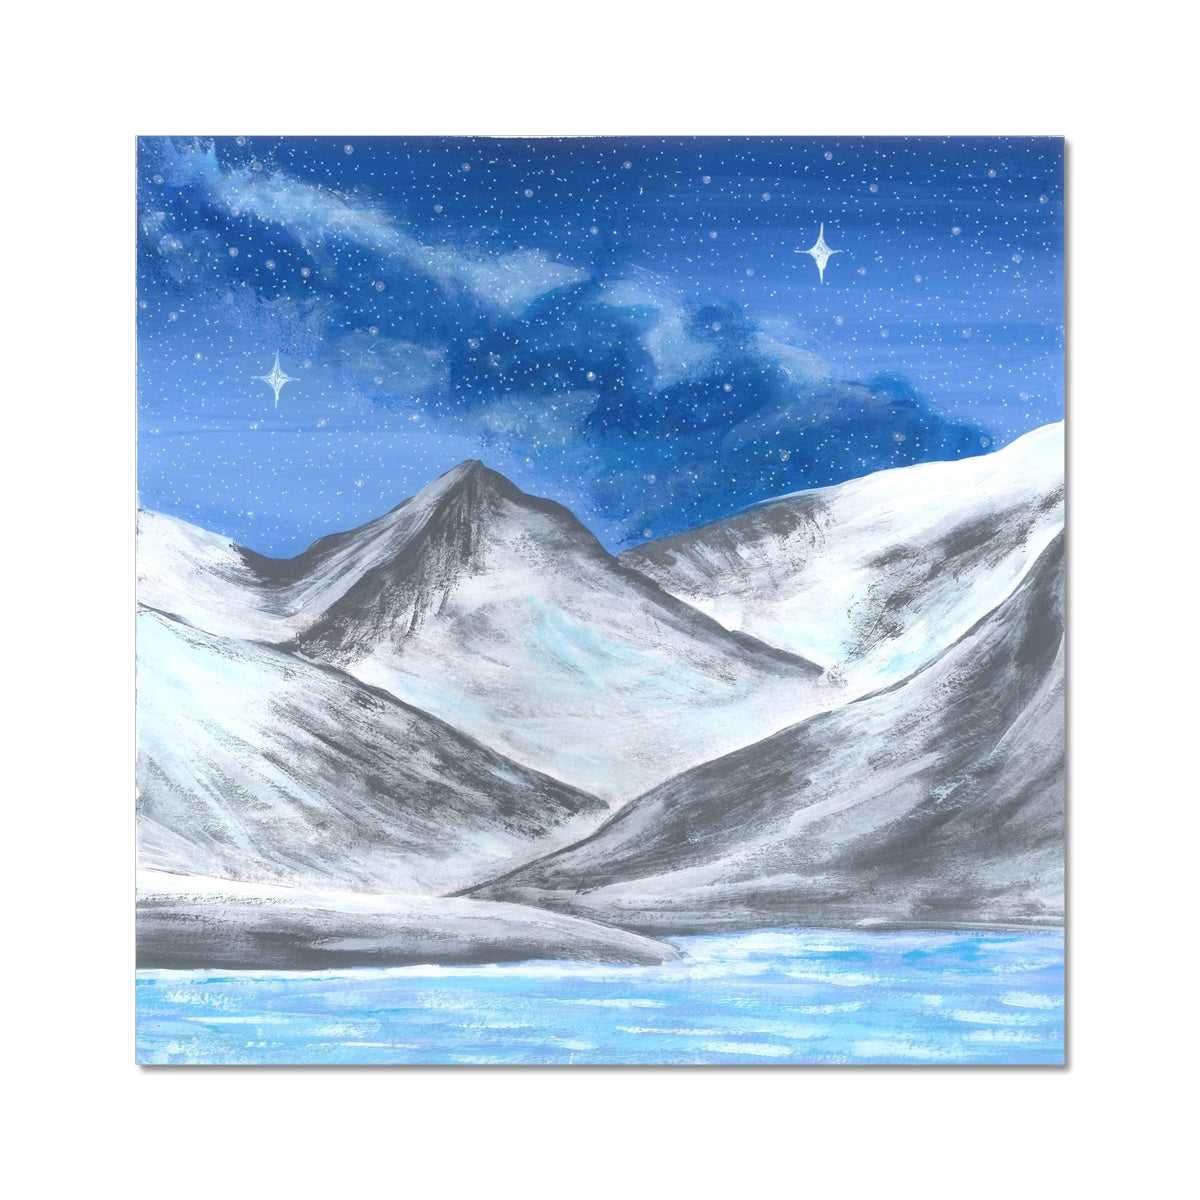 Groaning Iceberg - Starry Night's Embrace on Snowy Peaks and Icy River Fine Art Print - earth.fm